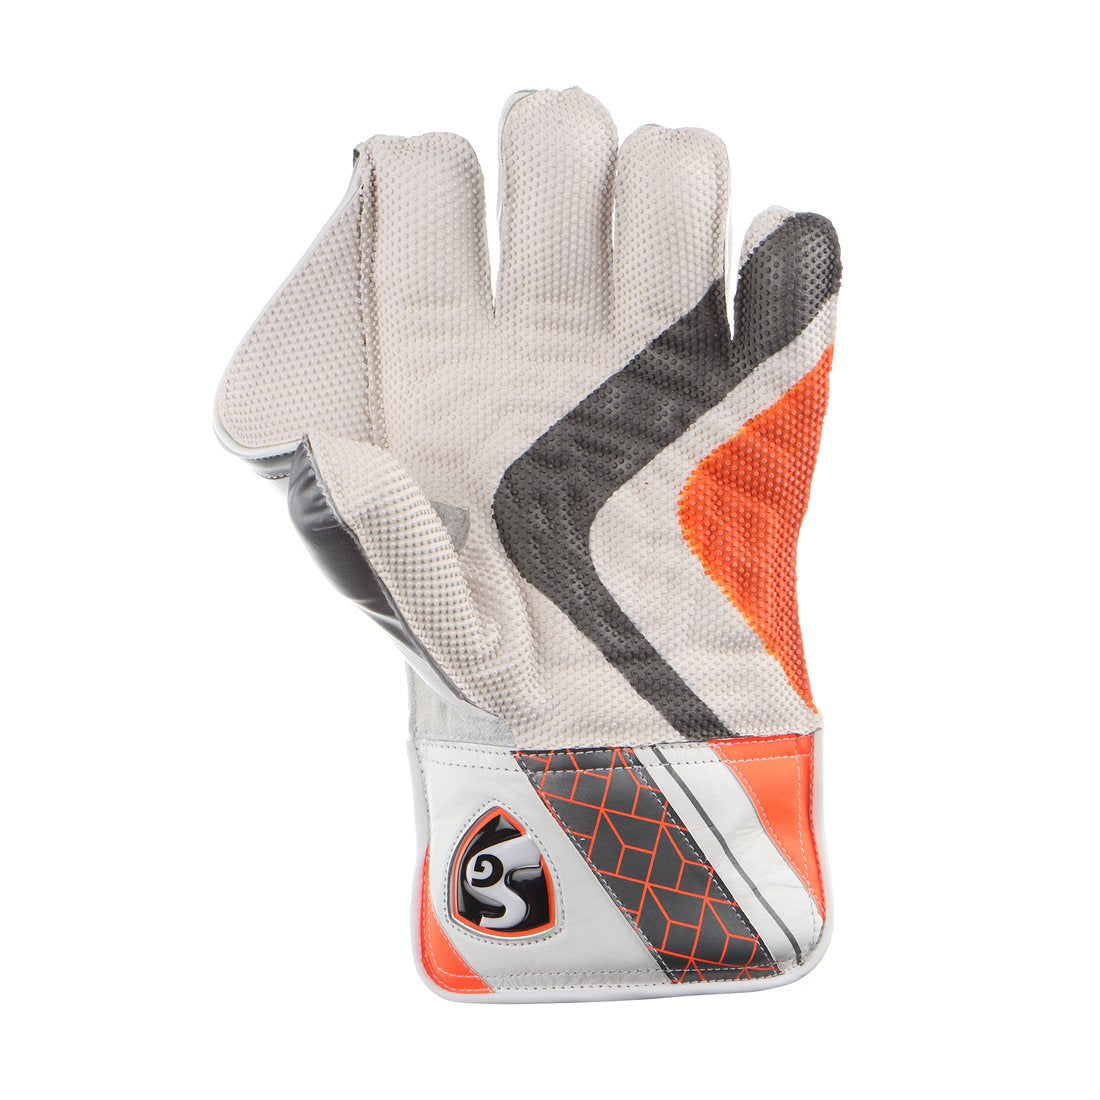 SG Tournament Wicketkeeping Gloves (Multi-Color)